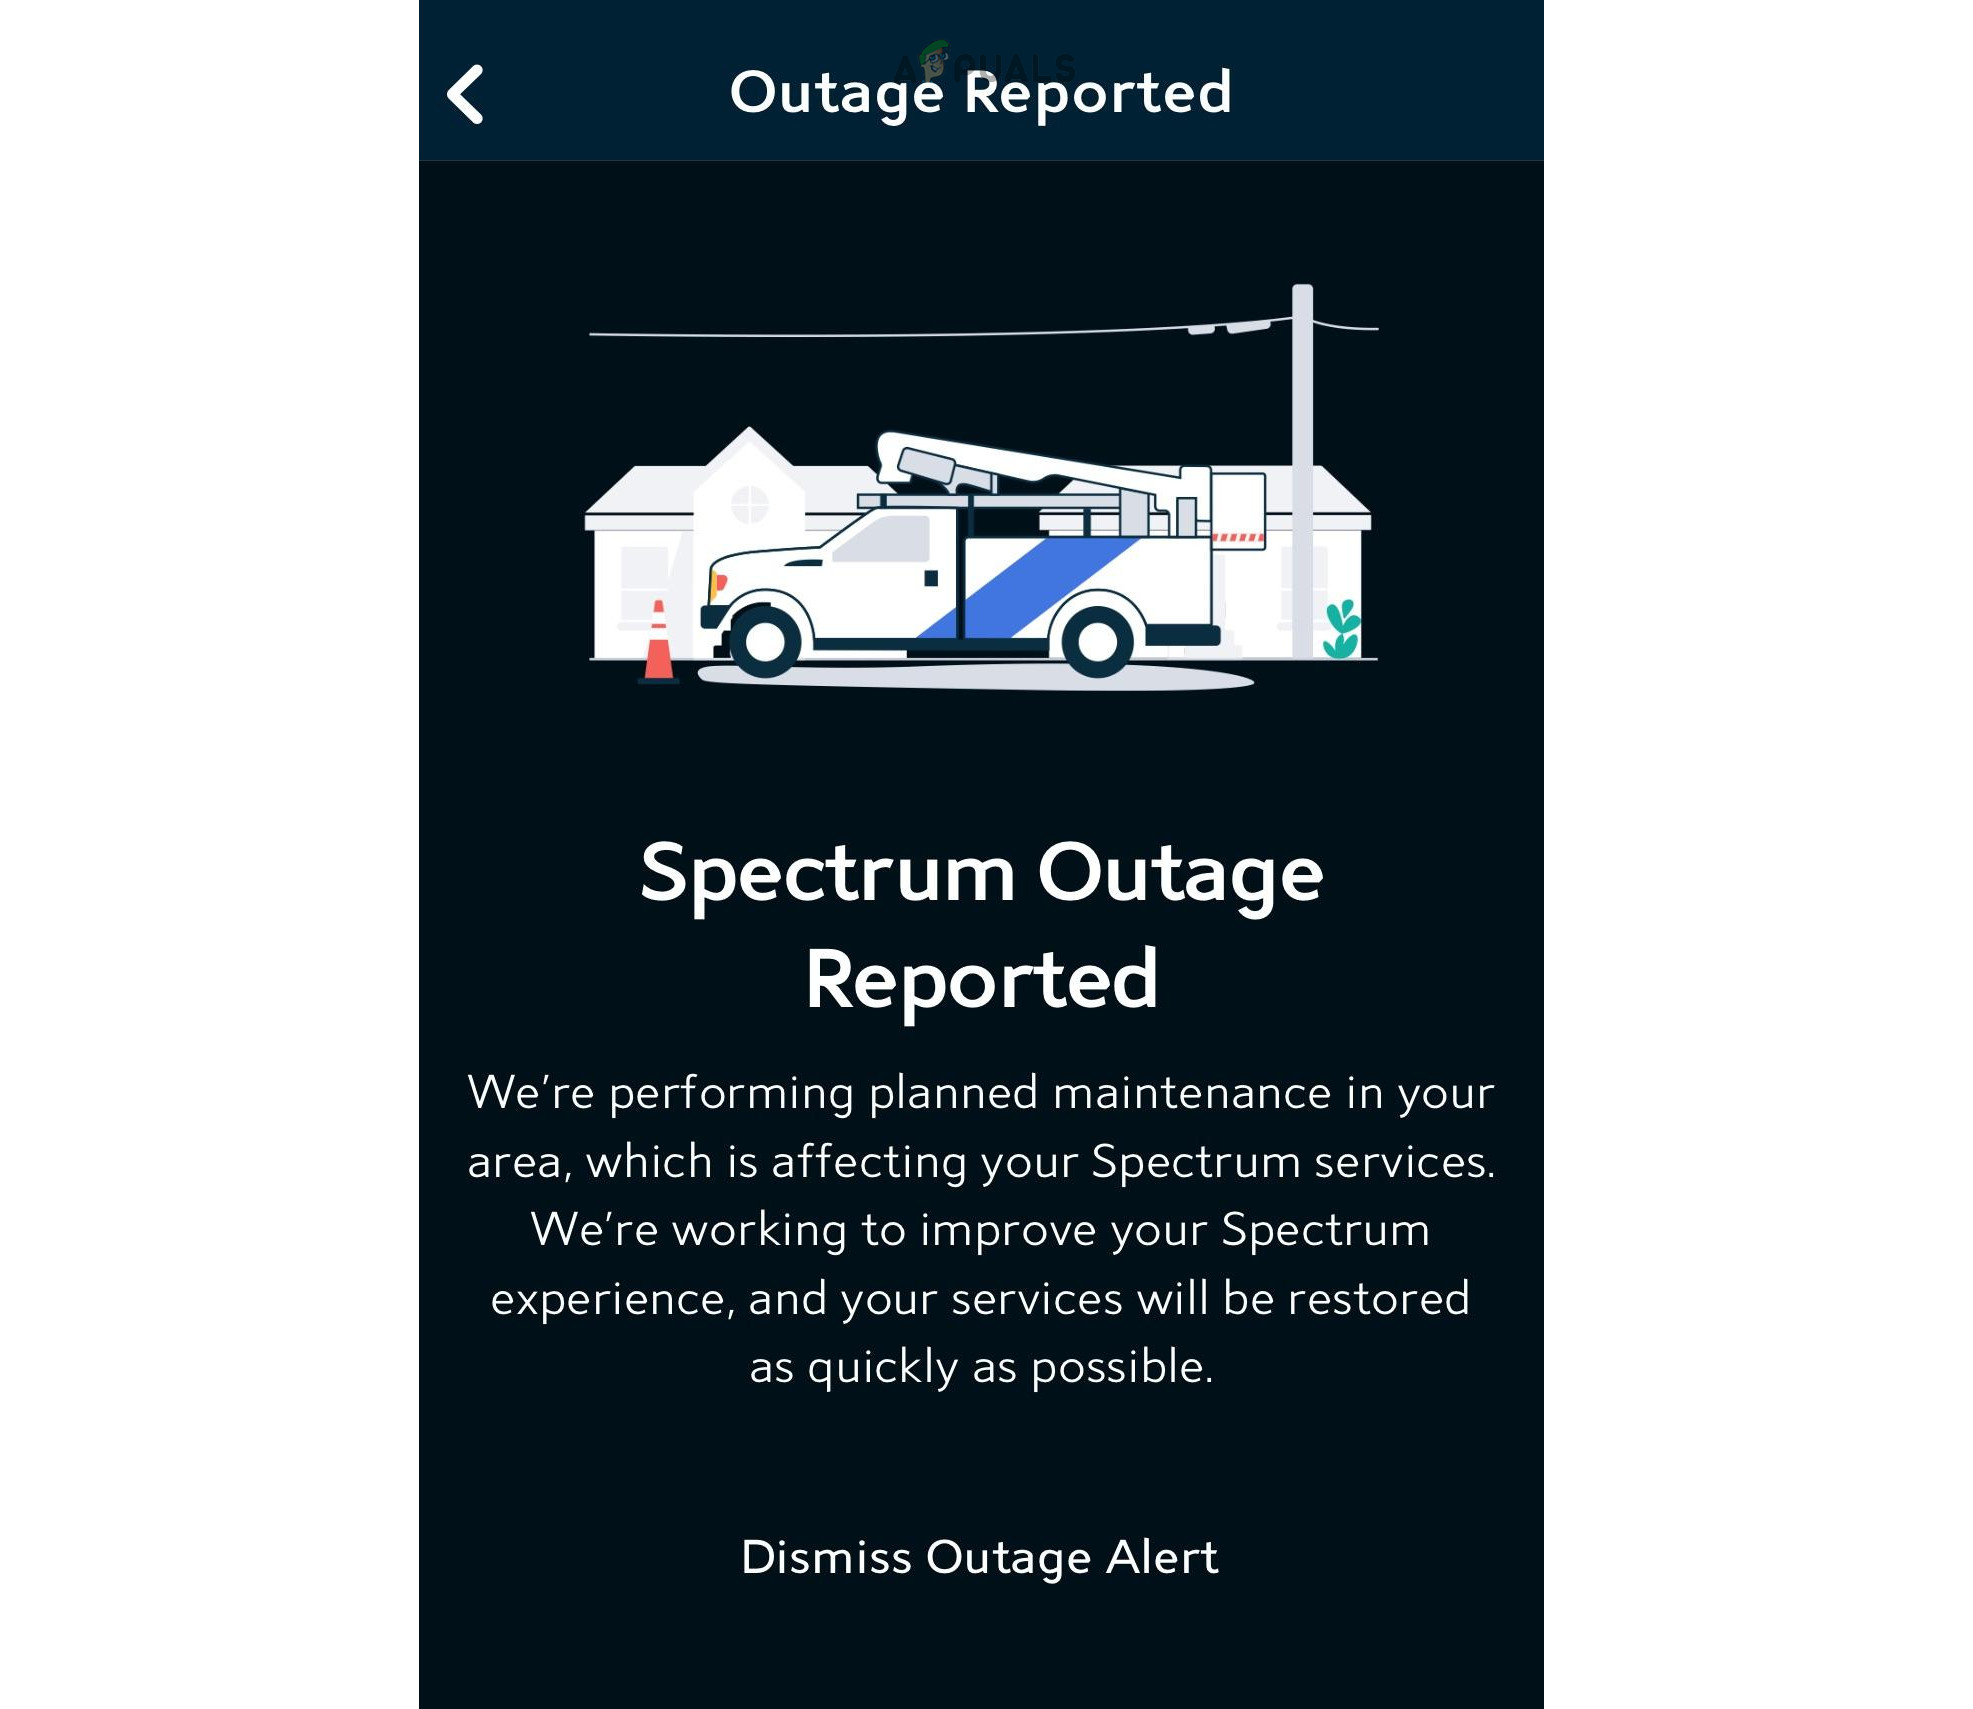 Check the Service Outage in the My Spectrum App